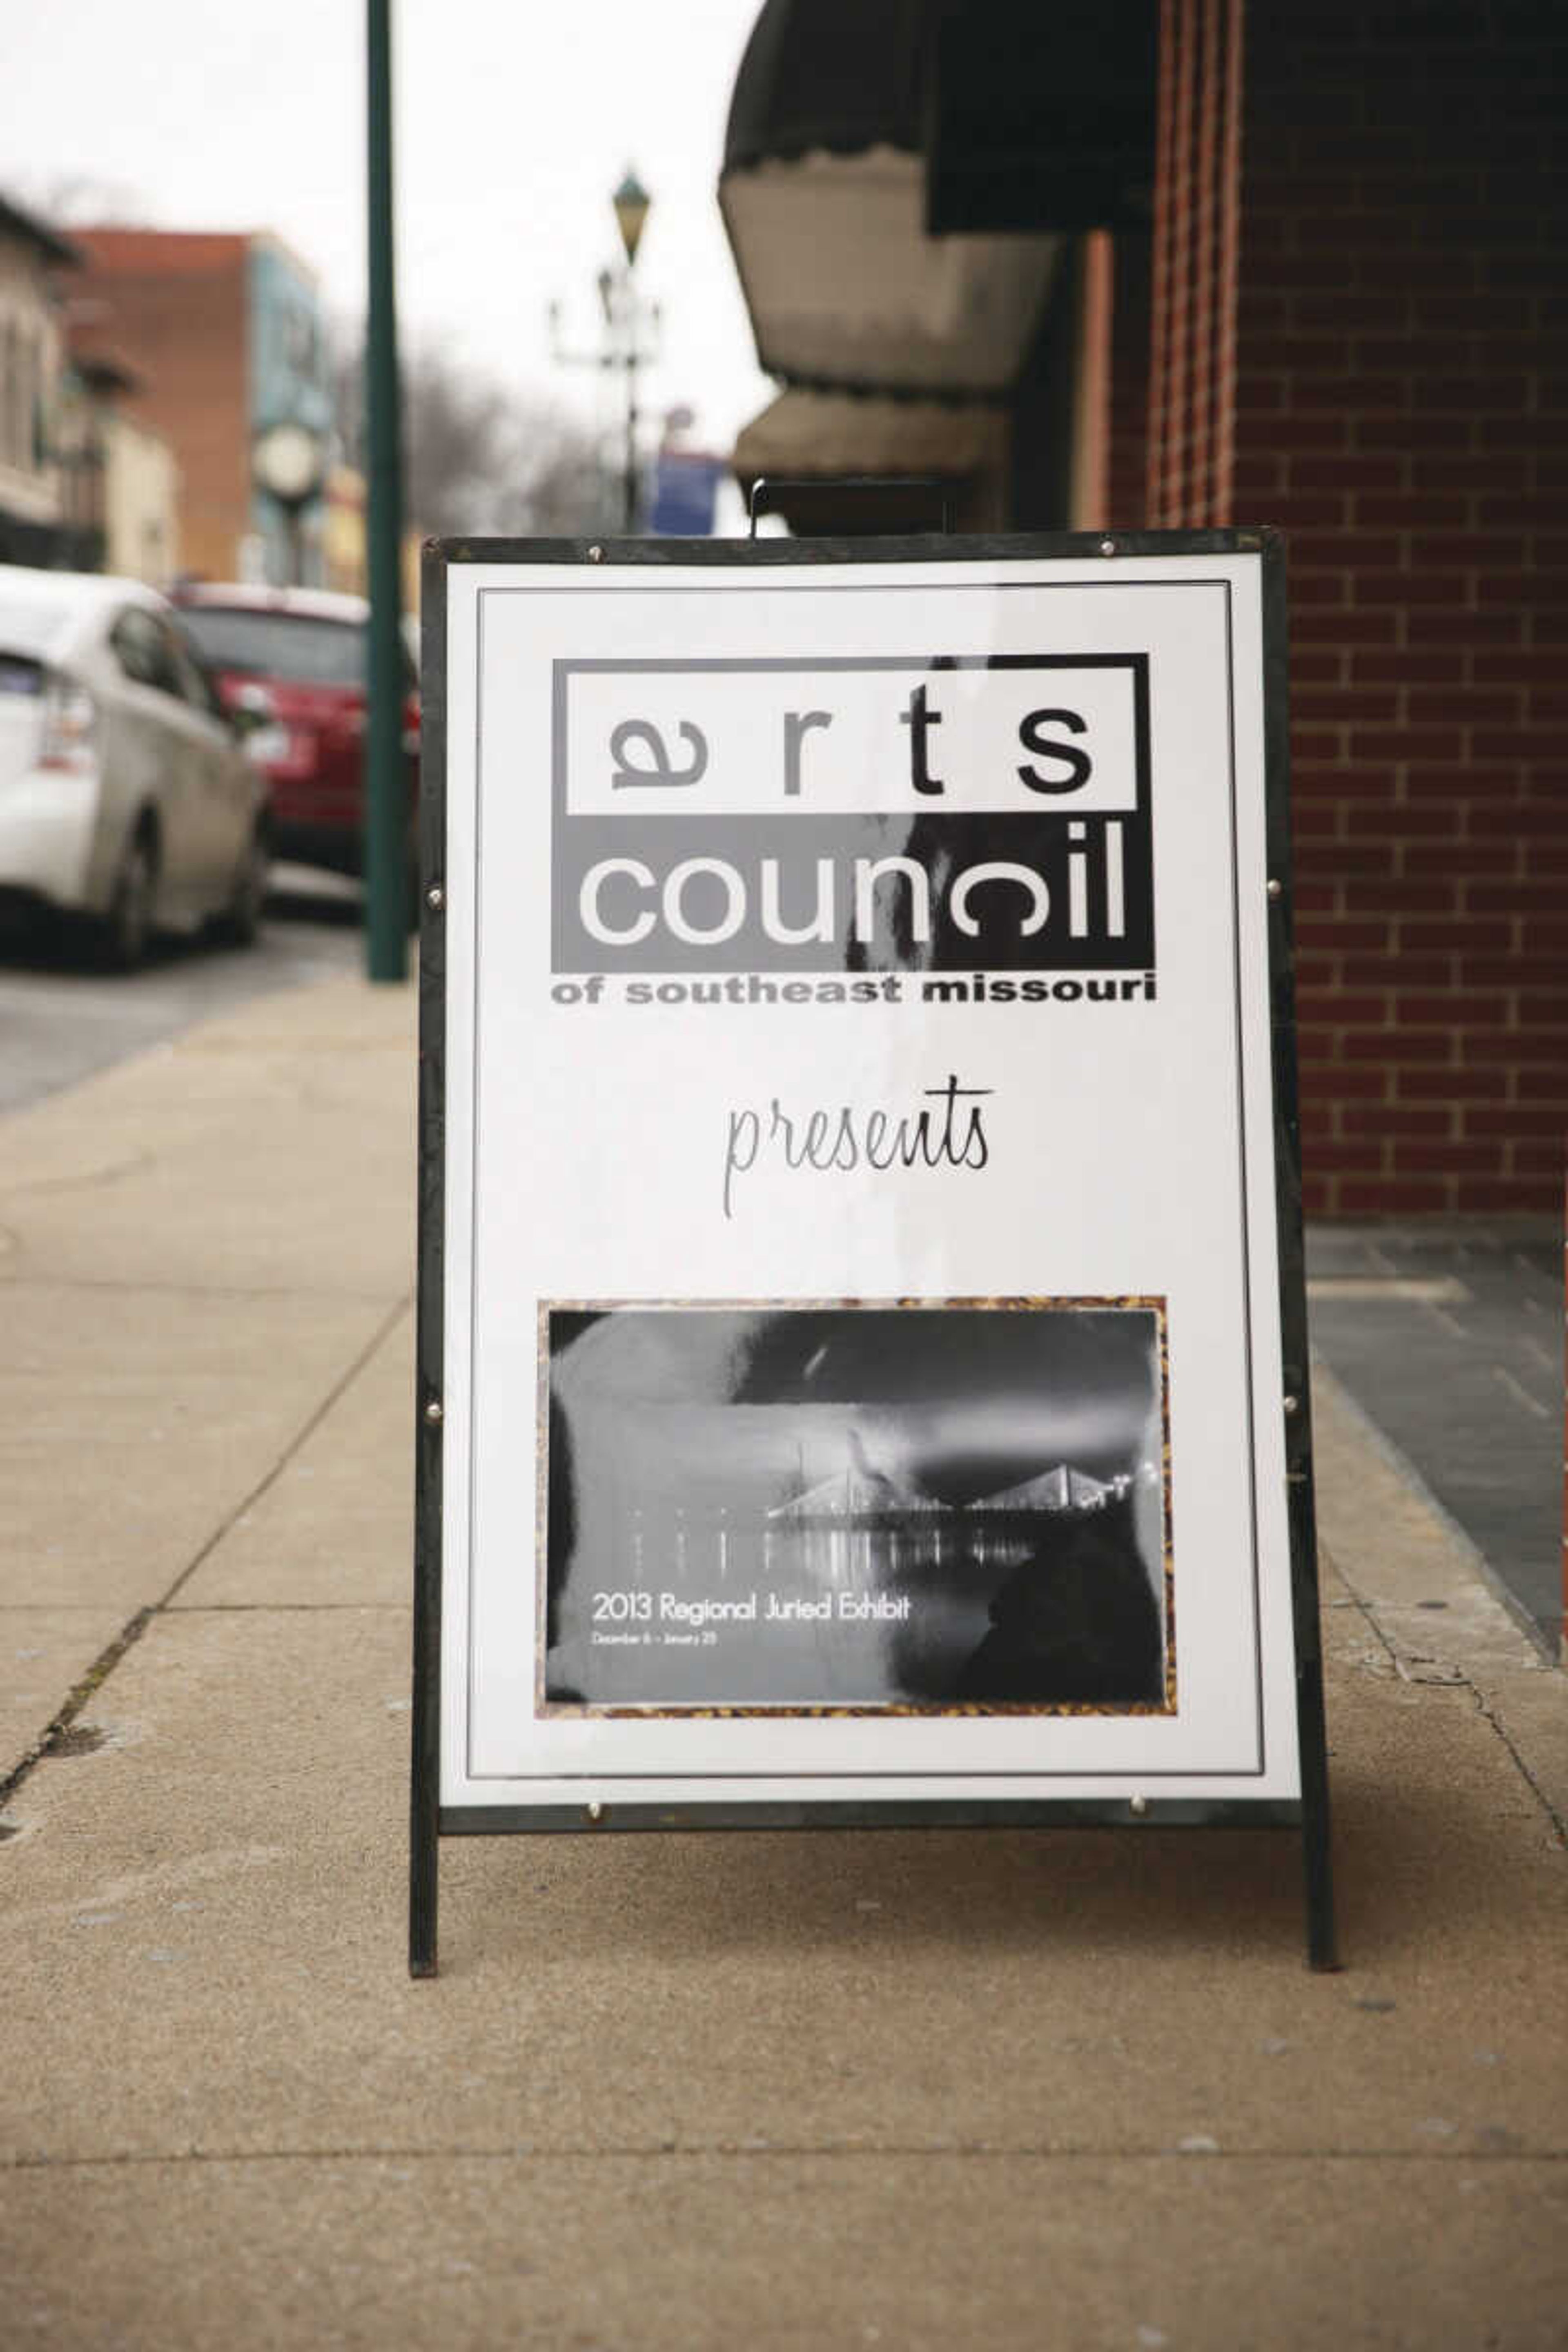 Arts Council of Southeast Missouri has mission to serve public and artists